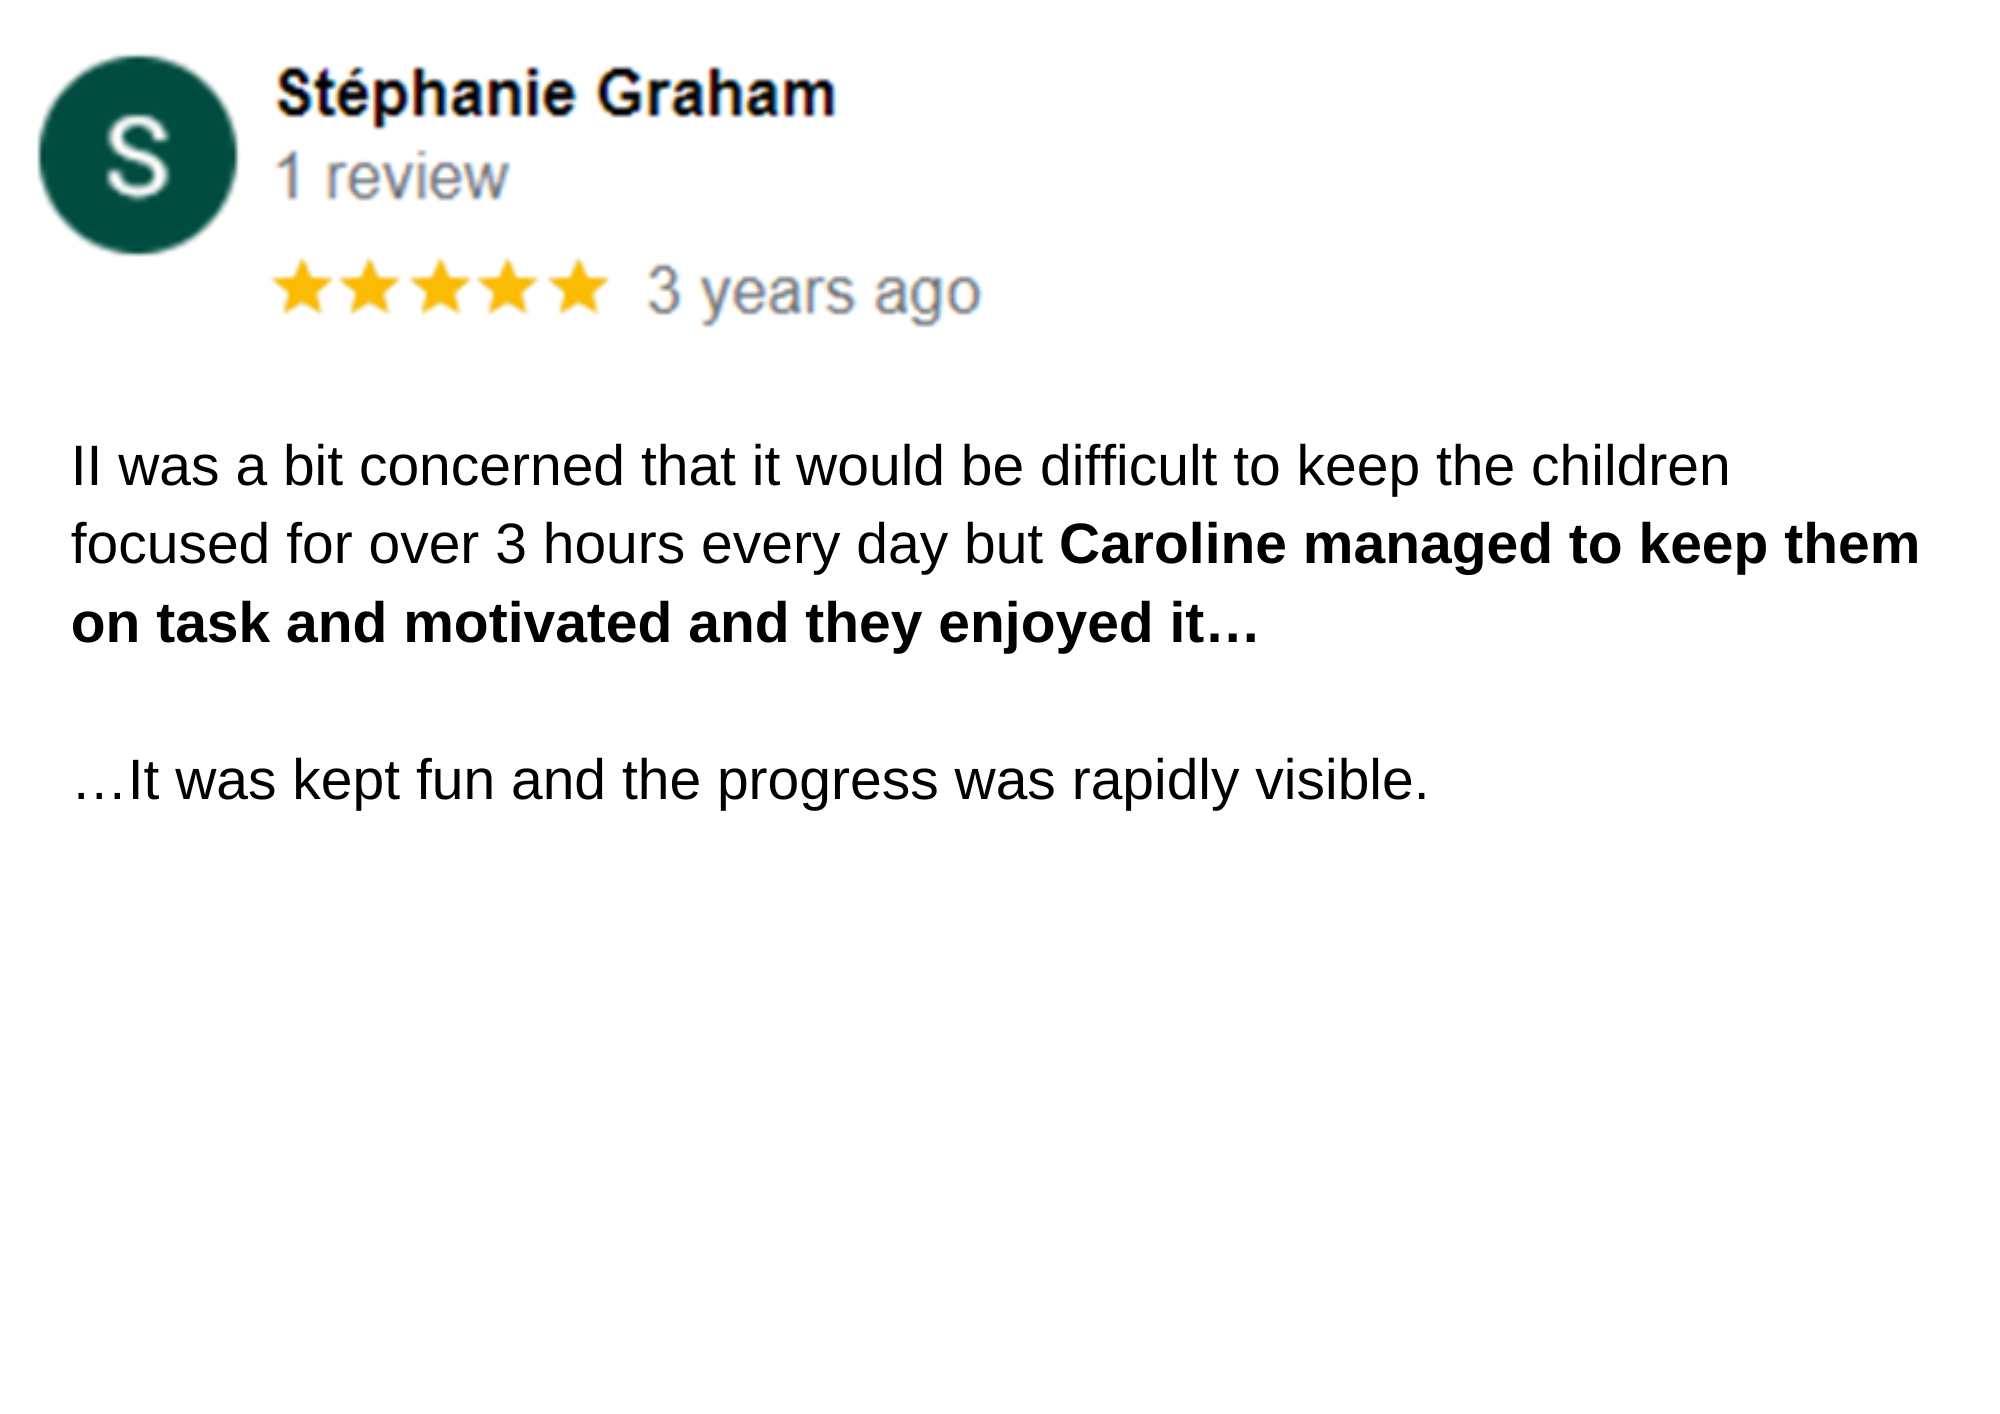 Stephanie Graham Google Review.png